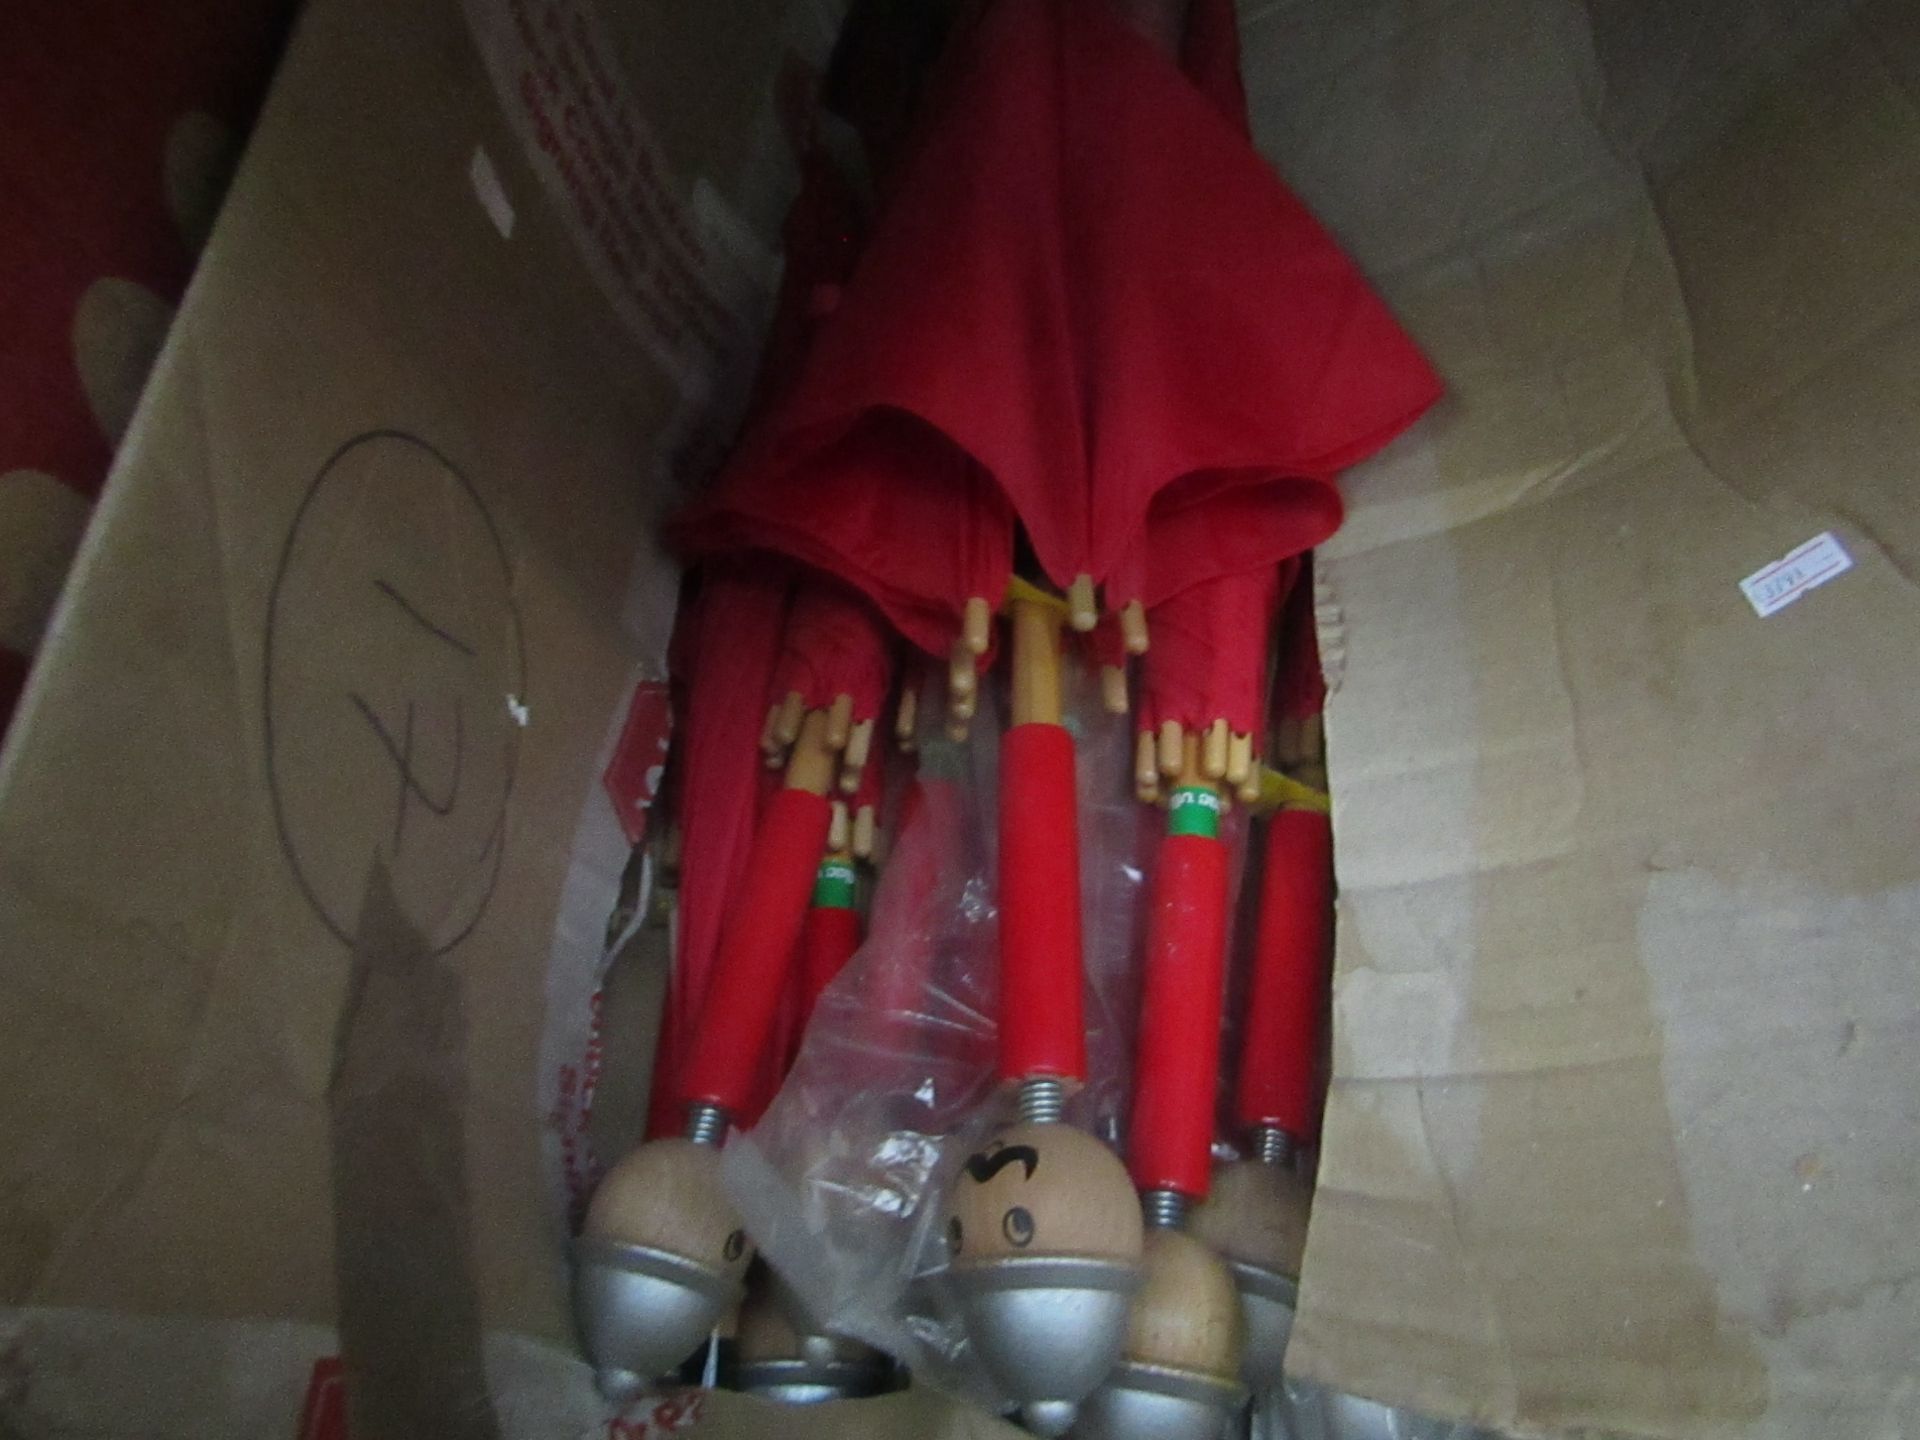 15x Vilac - Red Nut Cracker Umbrellas (Childrens) - All Unchecked & Boxed.